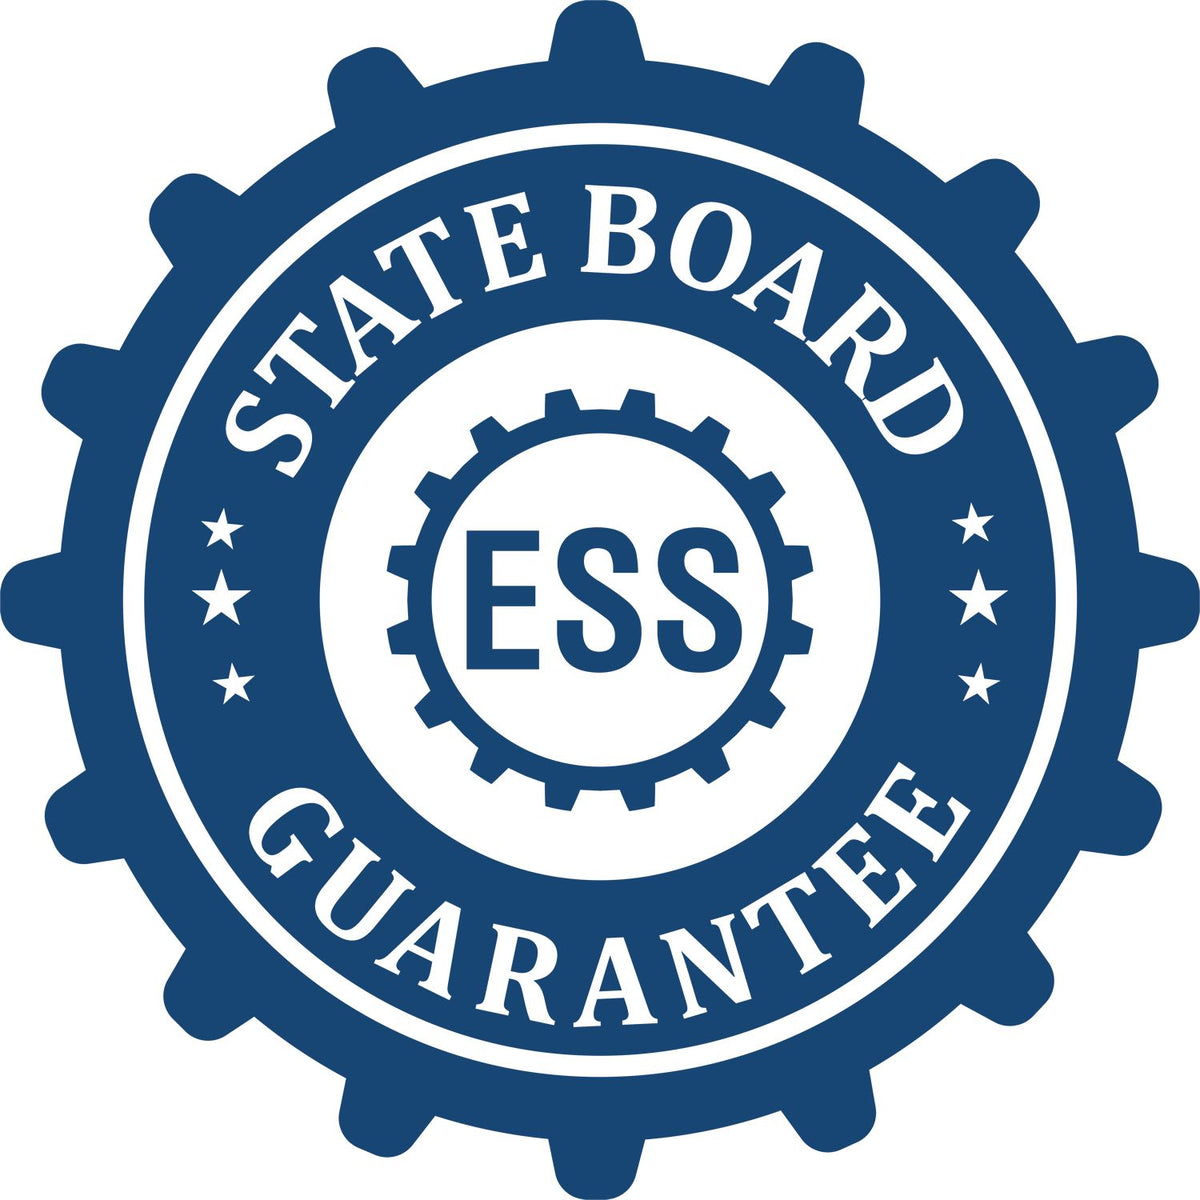 An emblem in a gear shape illustrating a state board guarantee for the Gift New York Landscape Architect Seal